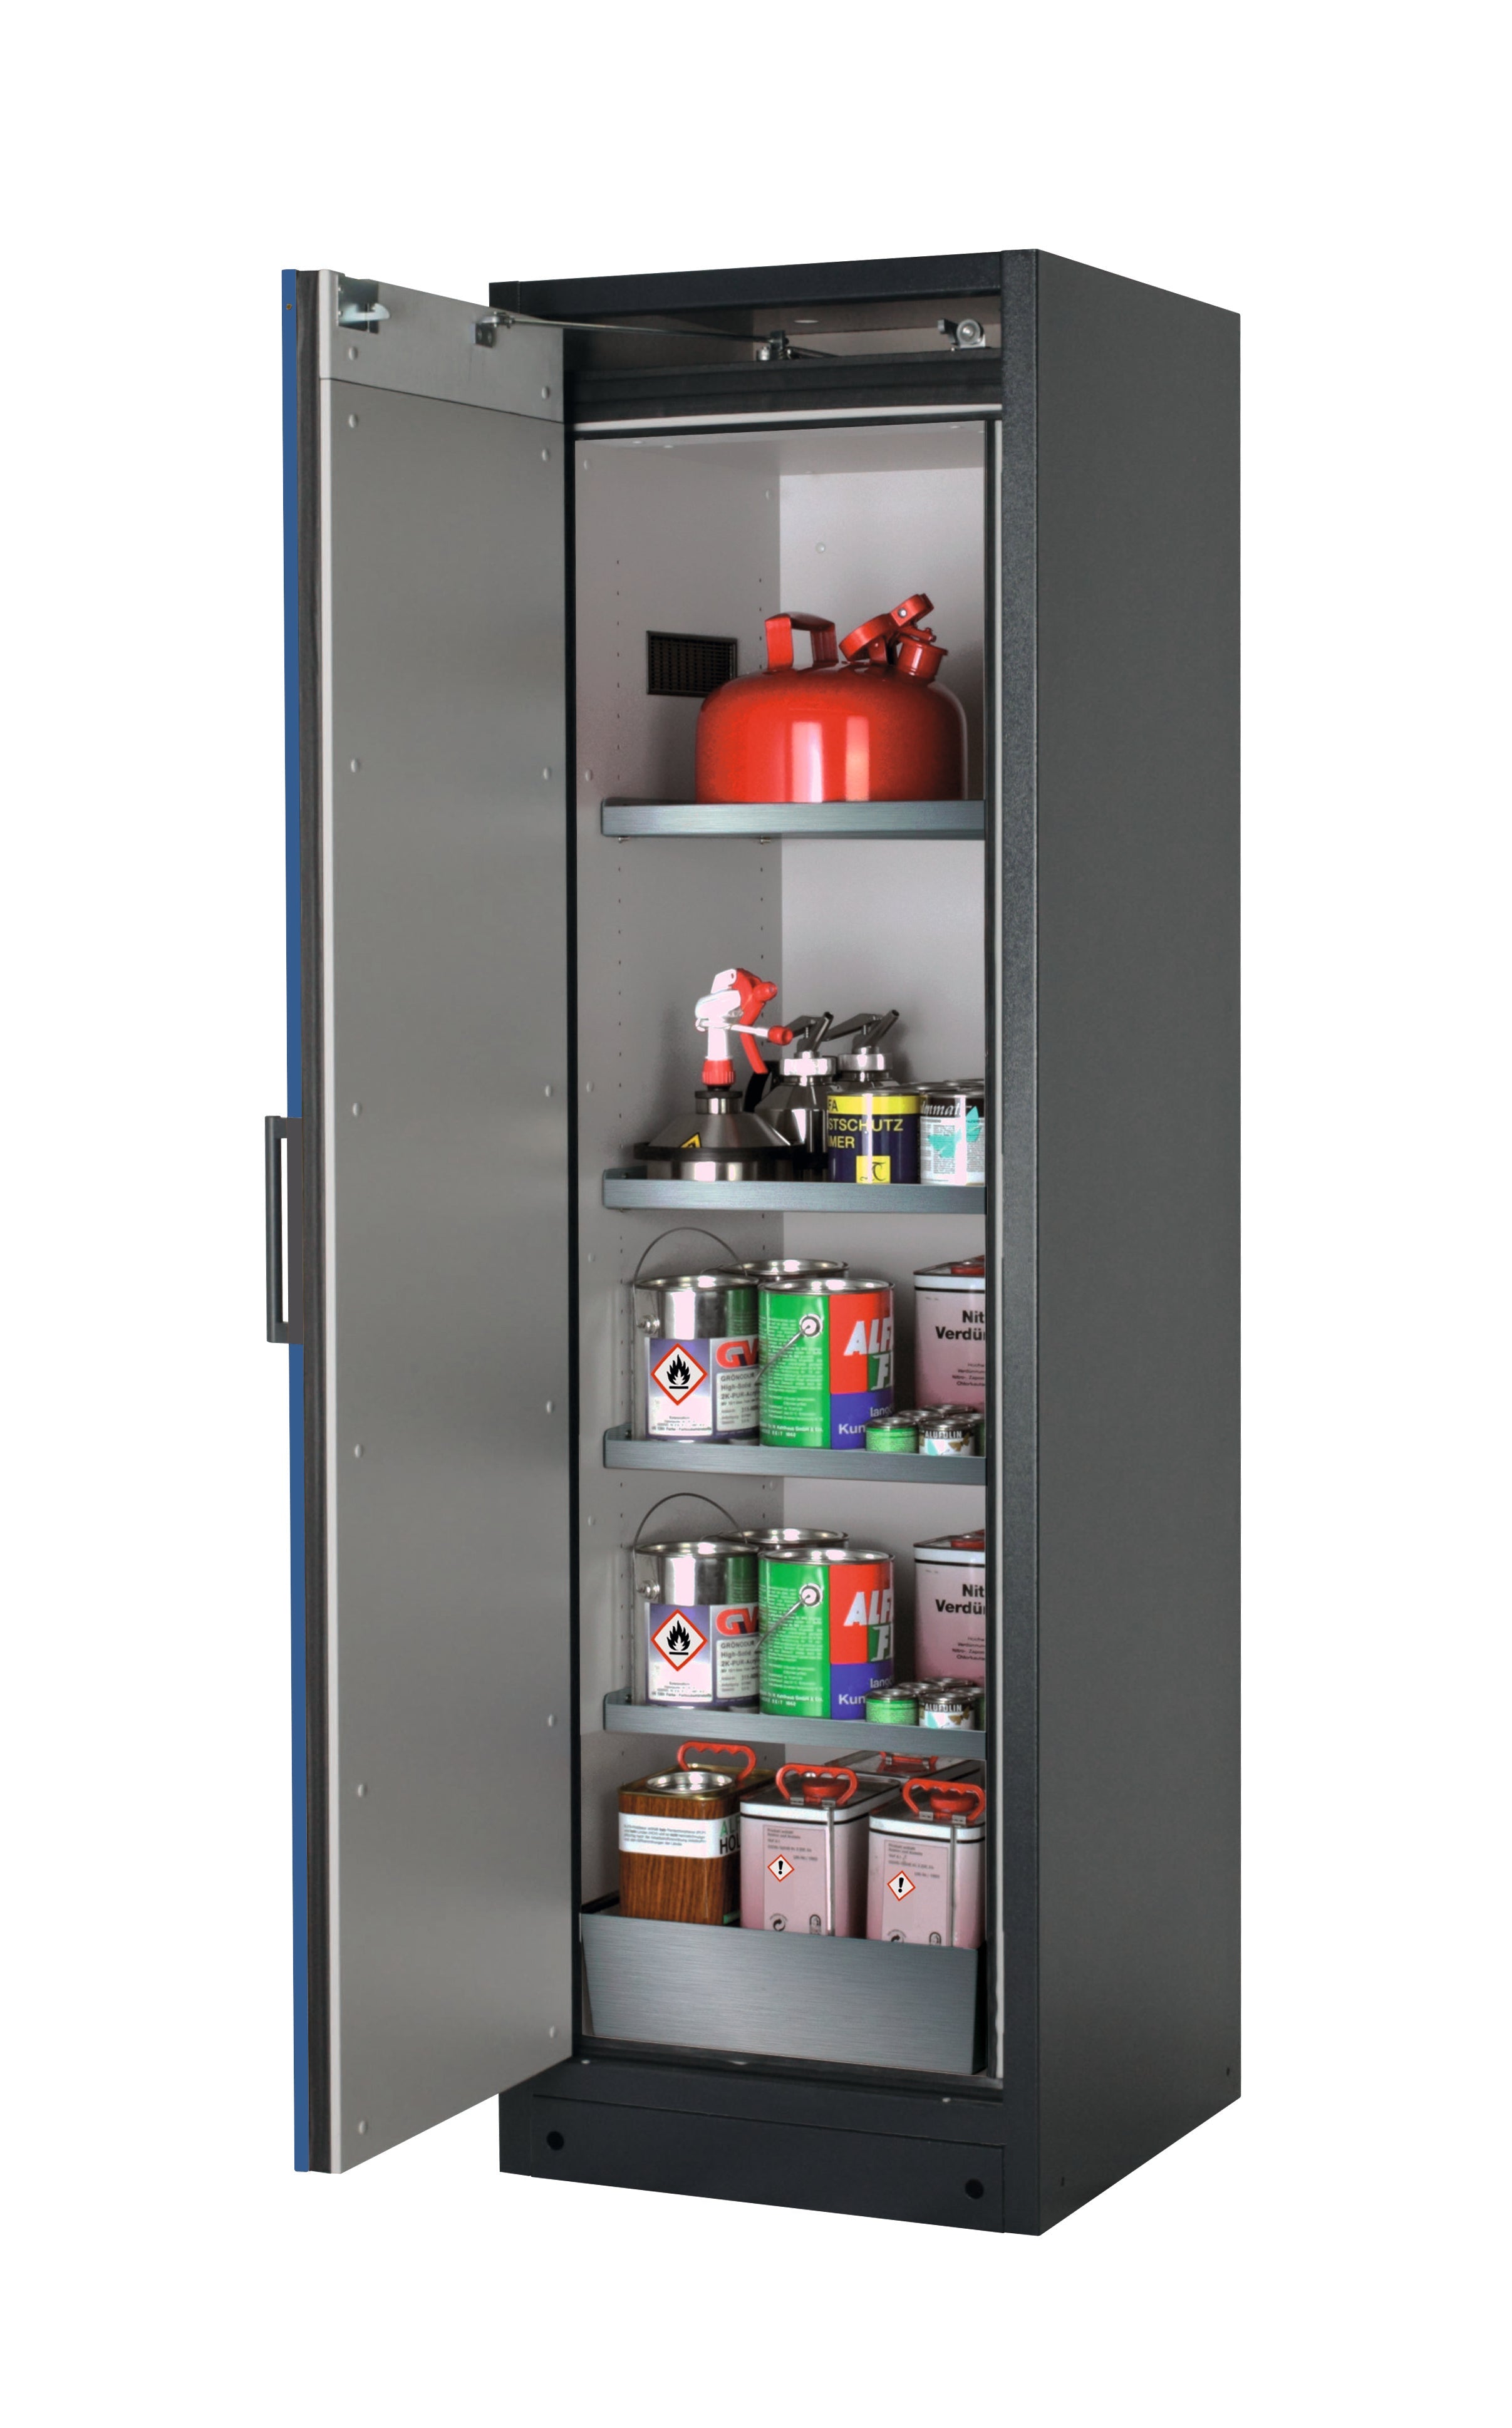 Type 90 safety storage cabinet Q-PEGASUS-90 model Q90.195.060.WDAC in gentian blue RAL 5010 with 4x shelf standard (stainless steel 1.4301),